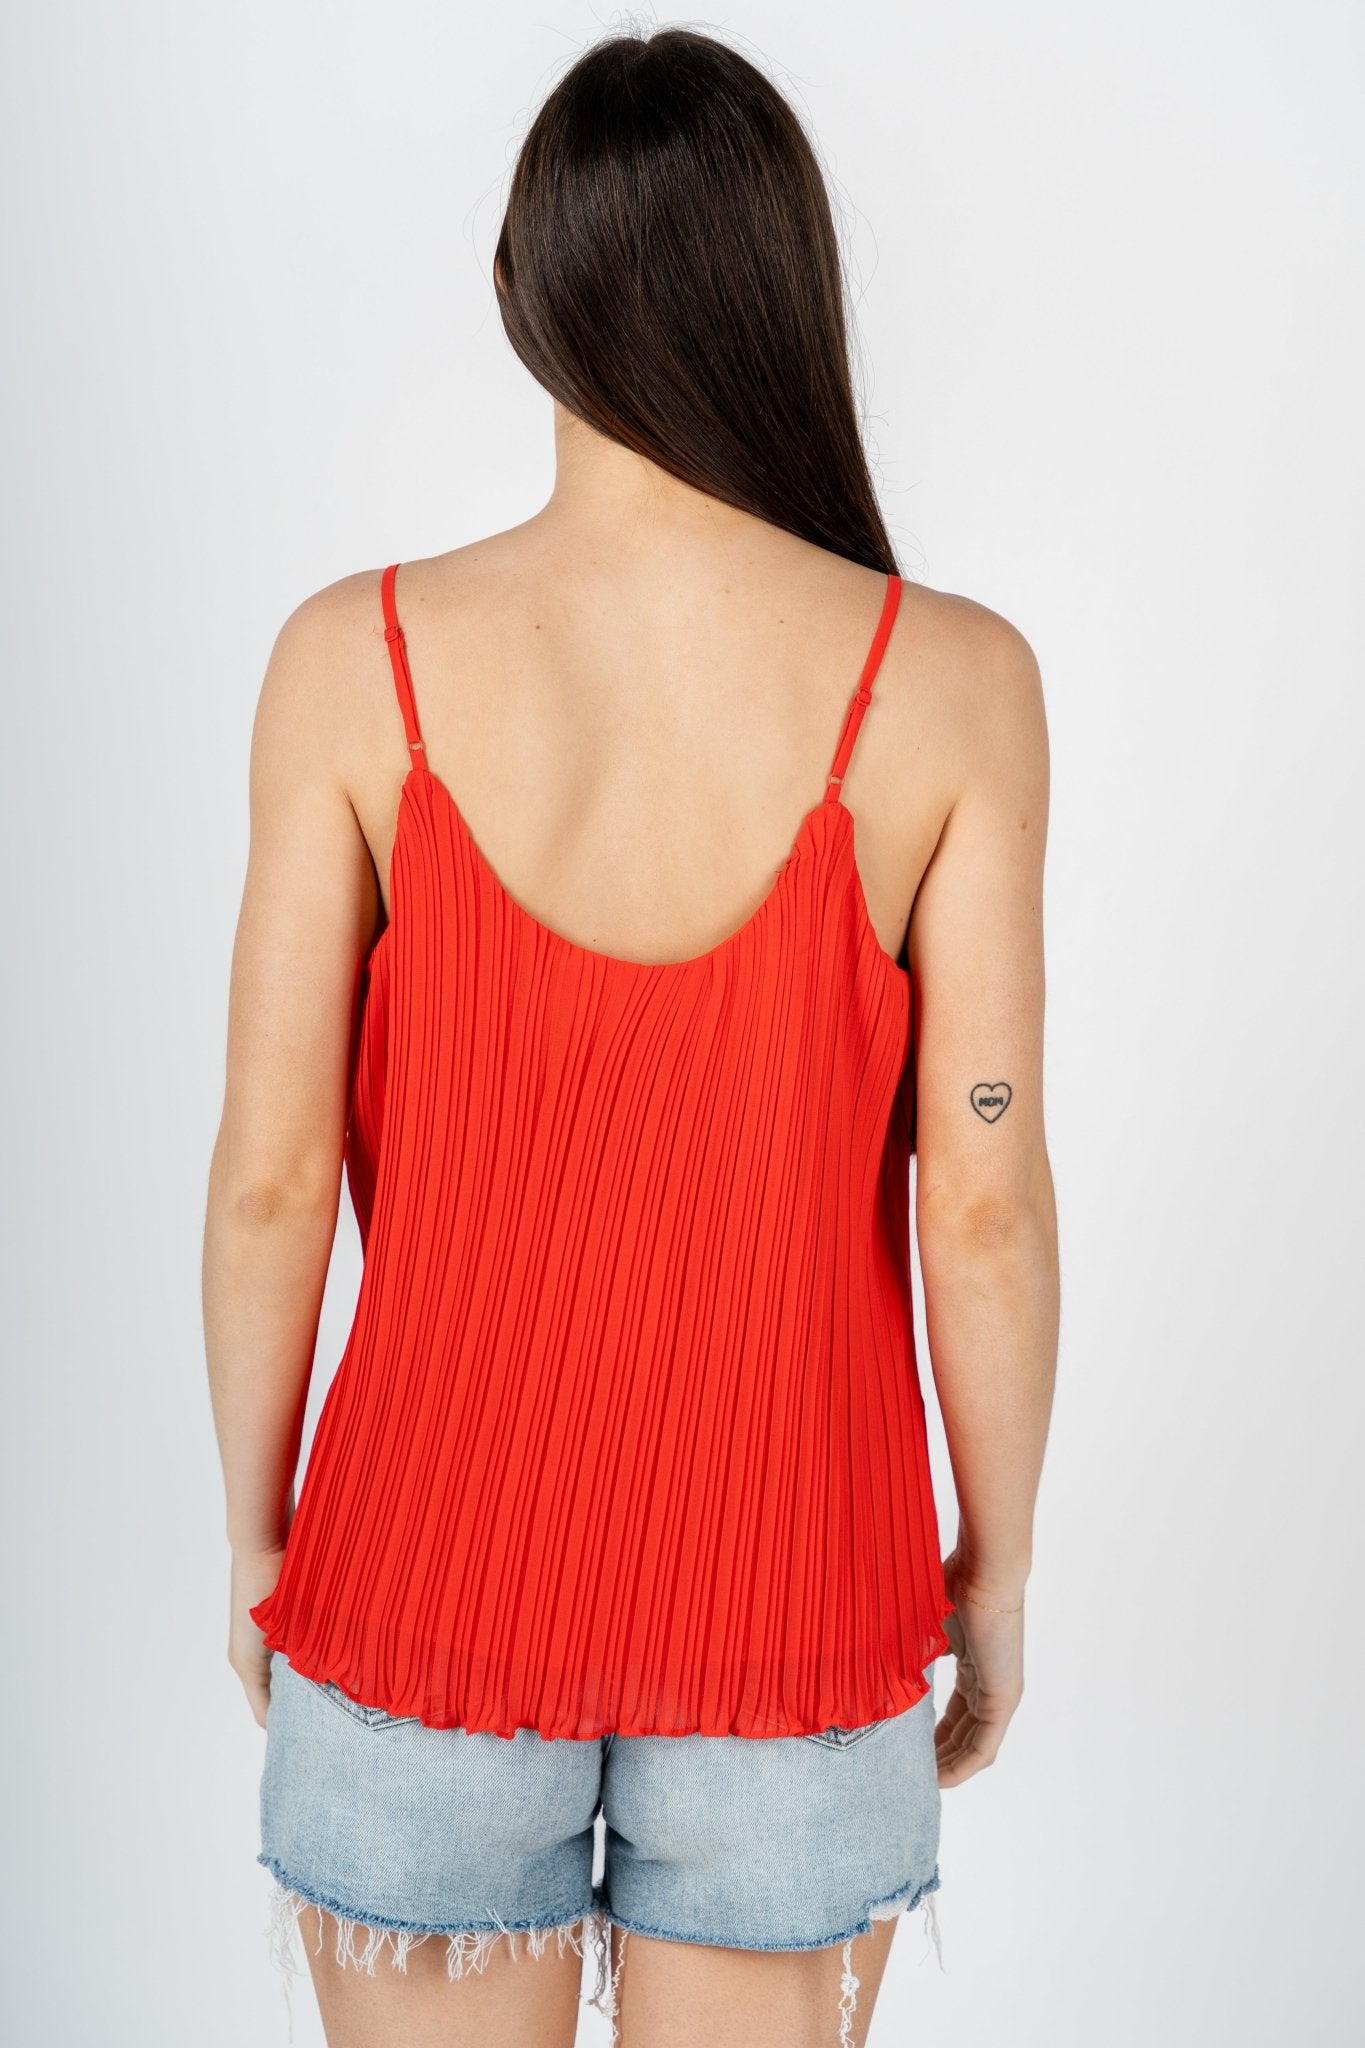 Pleated lace cami tank top coral red - Adorable sweater - Stylish Patriotic Summer Graphic Tees at Lush Fashion Lounge Boutique in OKC